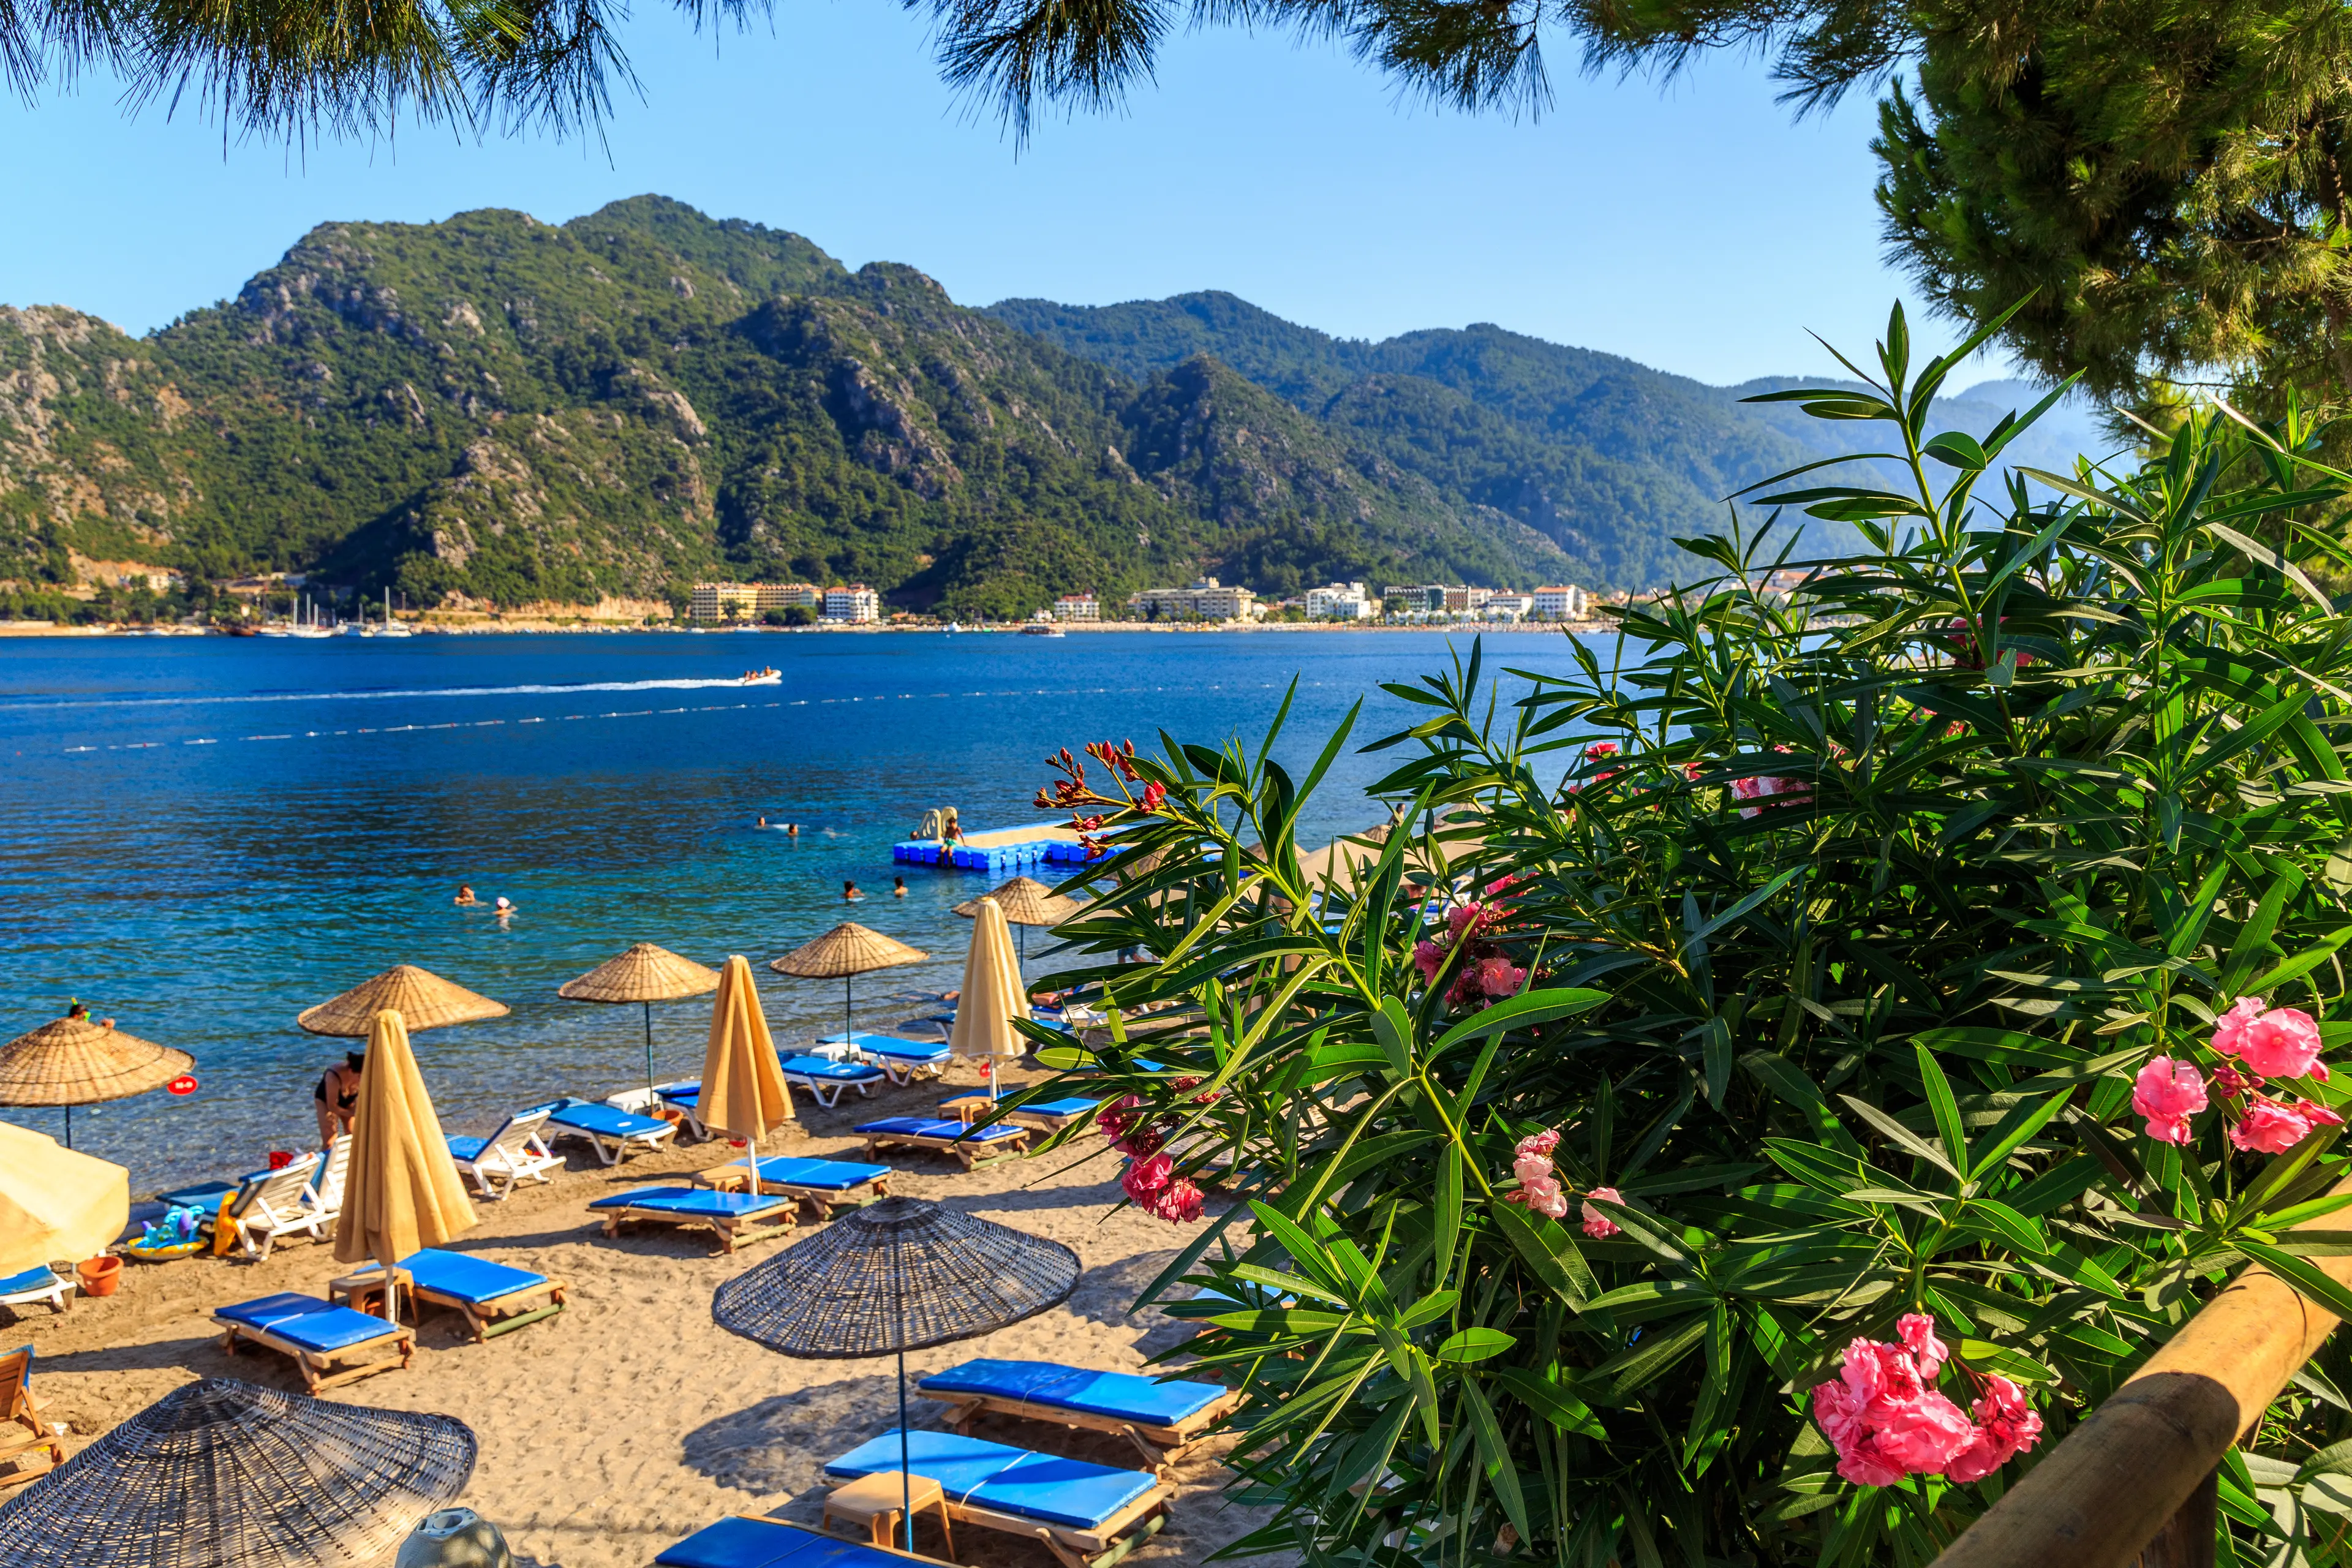 Discover Marmaris: A Local's One Day Gastronomic & Sightseeing Adventure